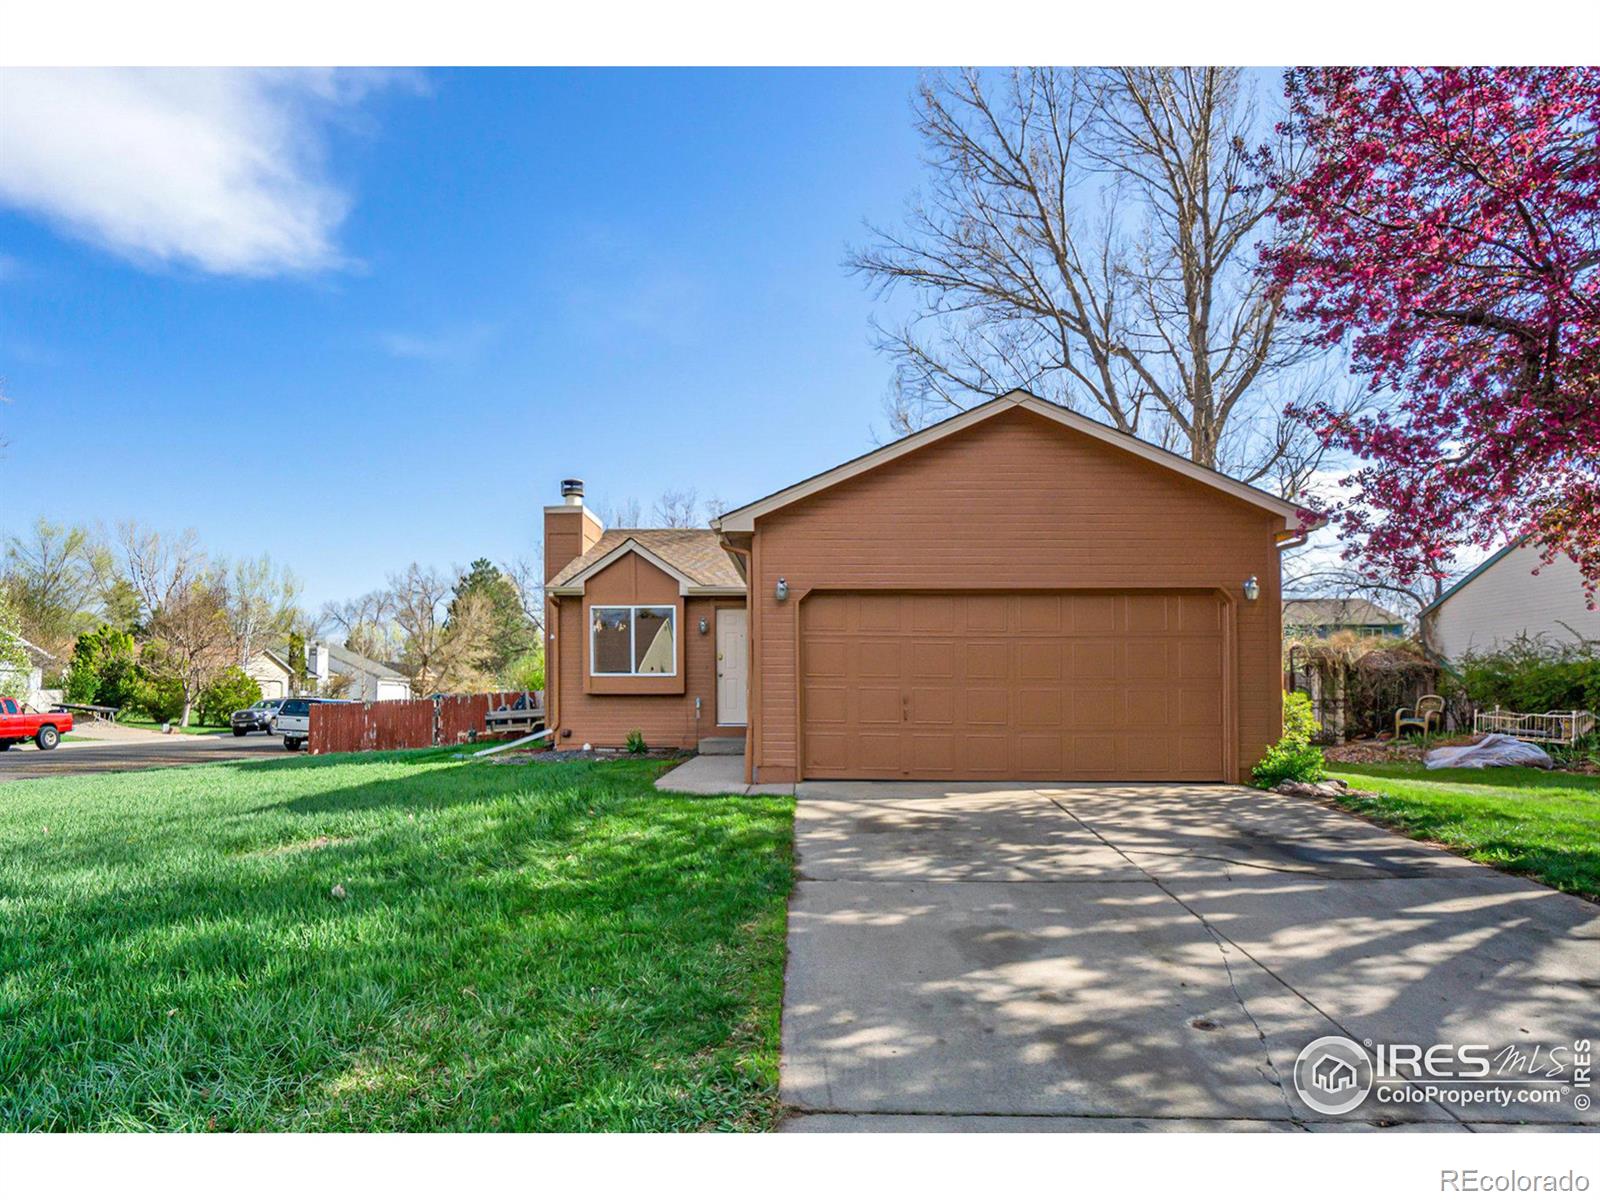 1401  Sioux Boulevard, fort collins MLS: 4567891008058 Beds: 4 Baths: 2 Price: $515,000